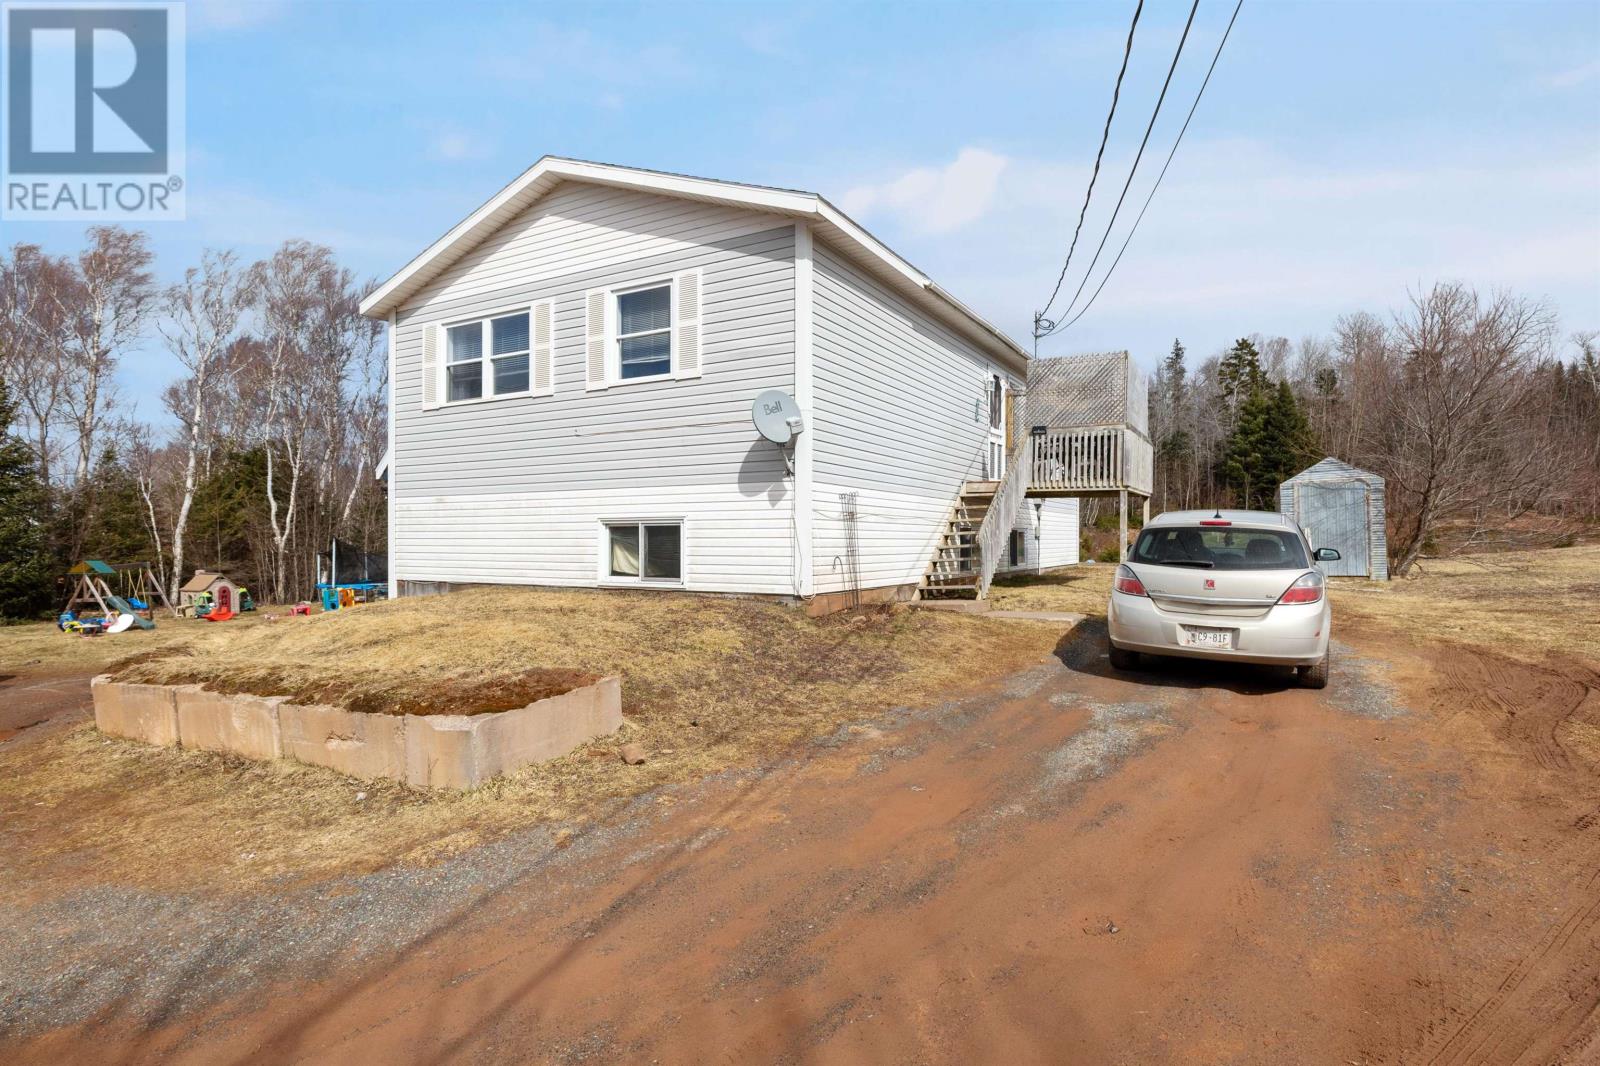 5819/5821 Campbell Road, Victoria Cross, Montague, Prince Edward Island  C0A 1R0 - Photo 1 - 202405401